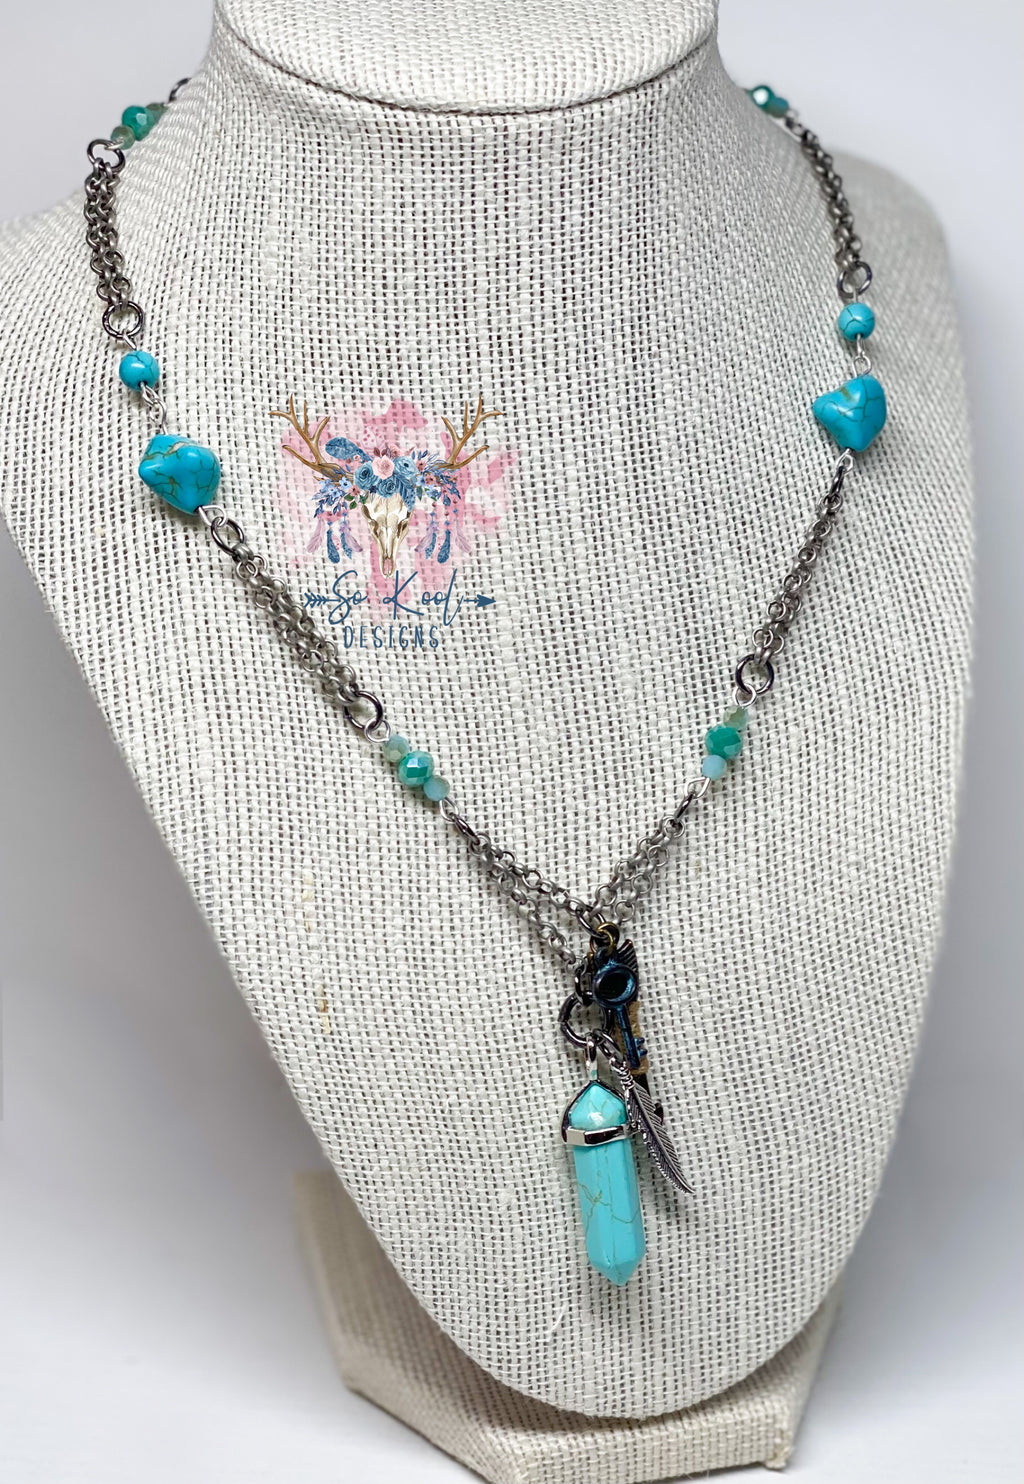 Turquoise beaded and chain necklace